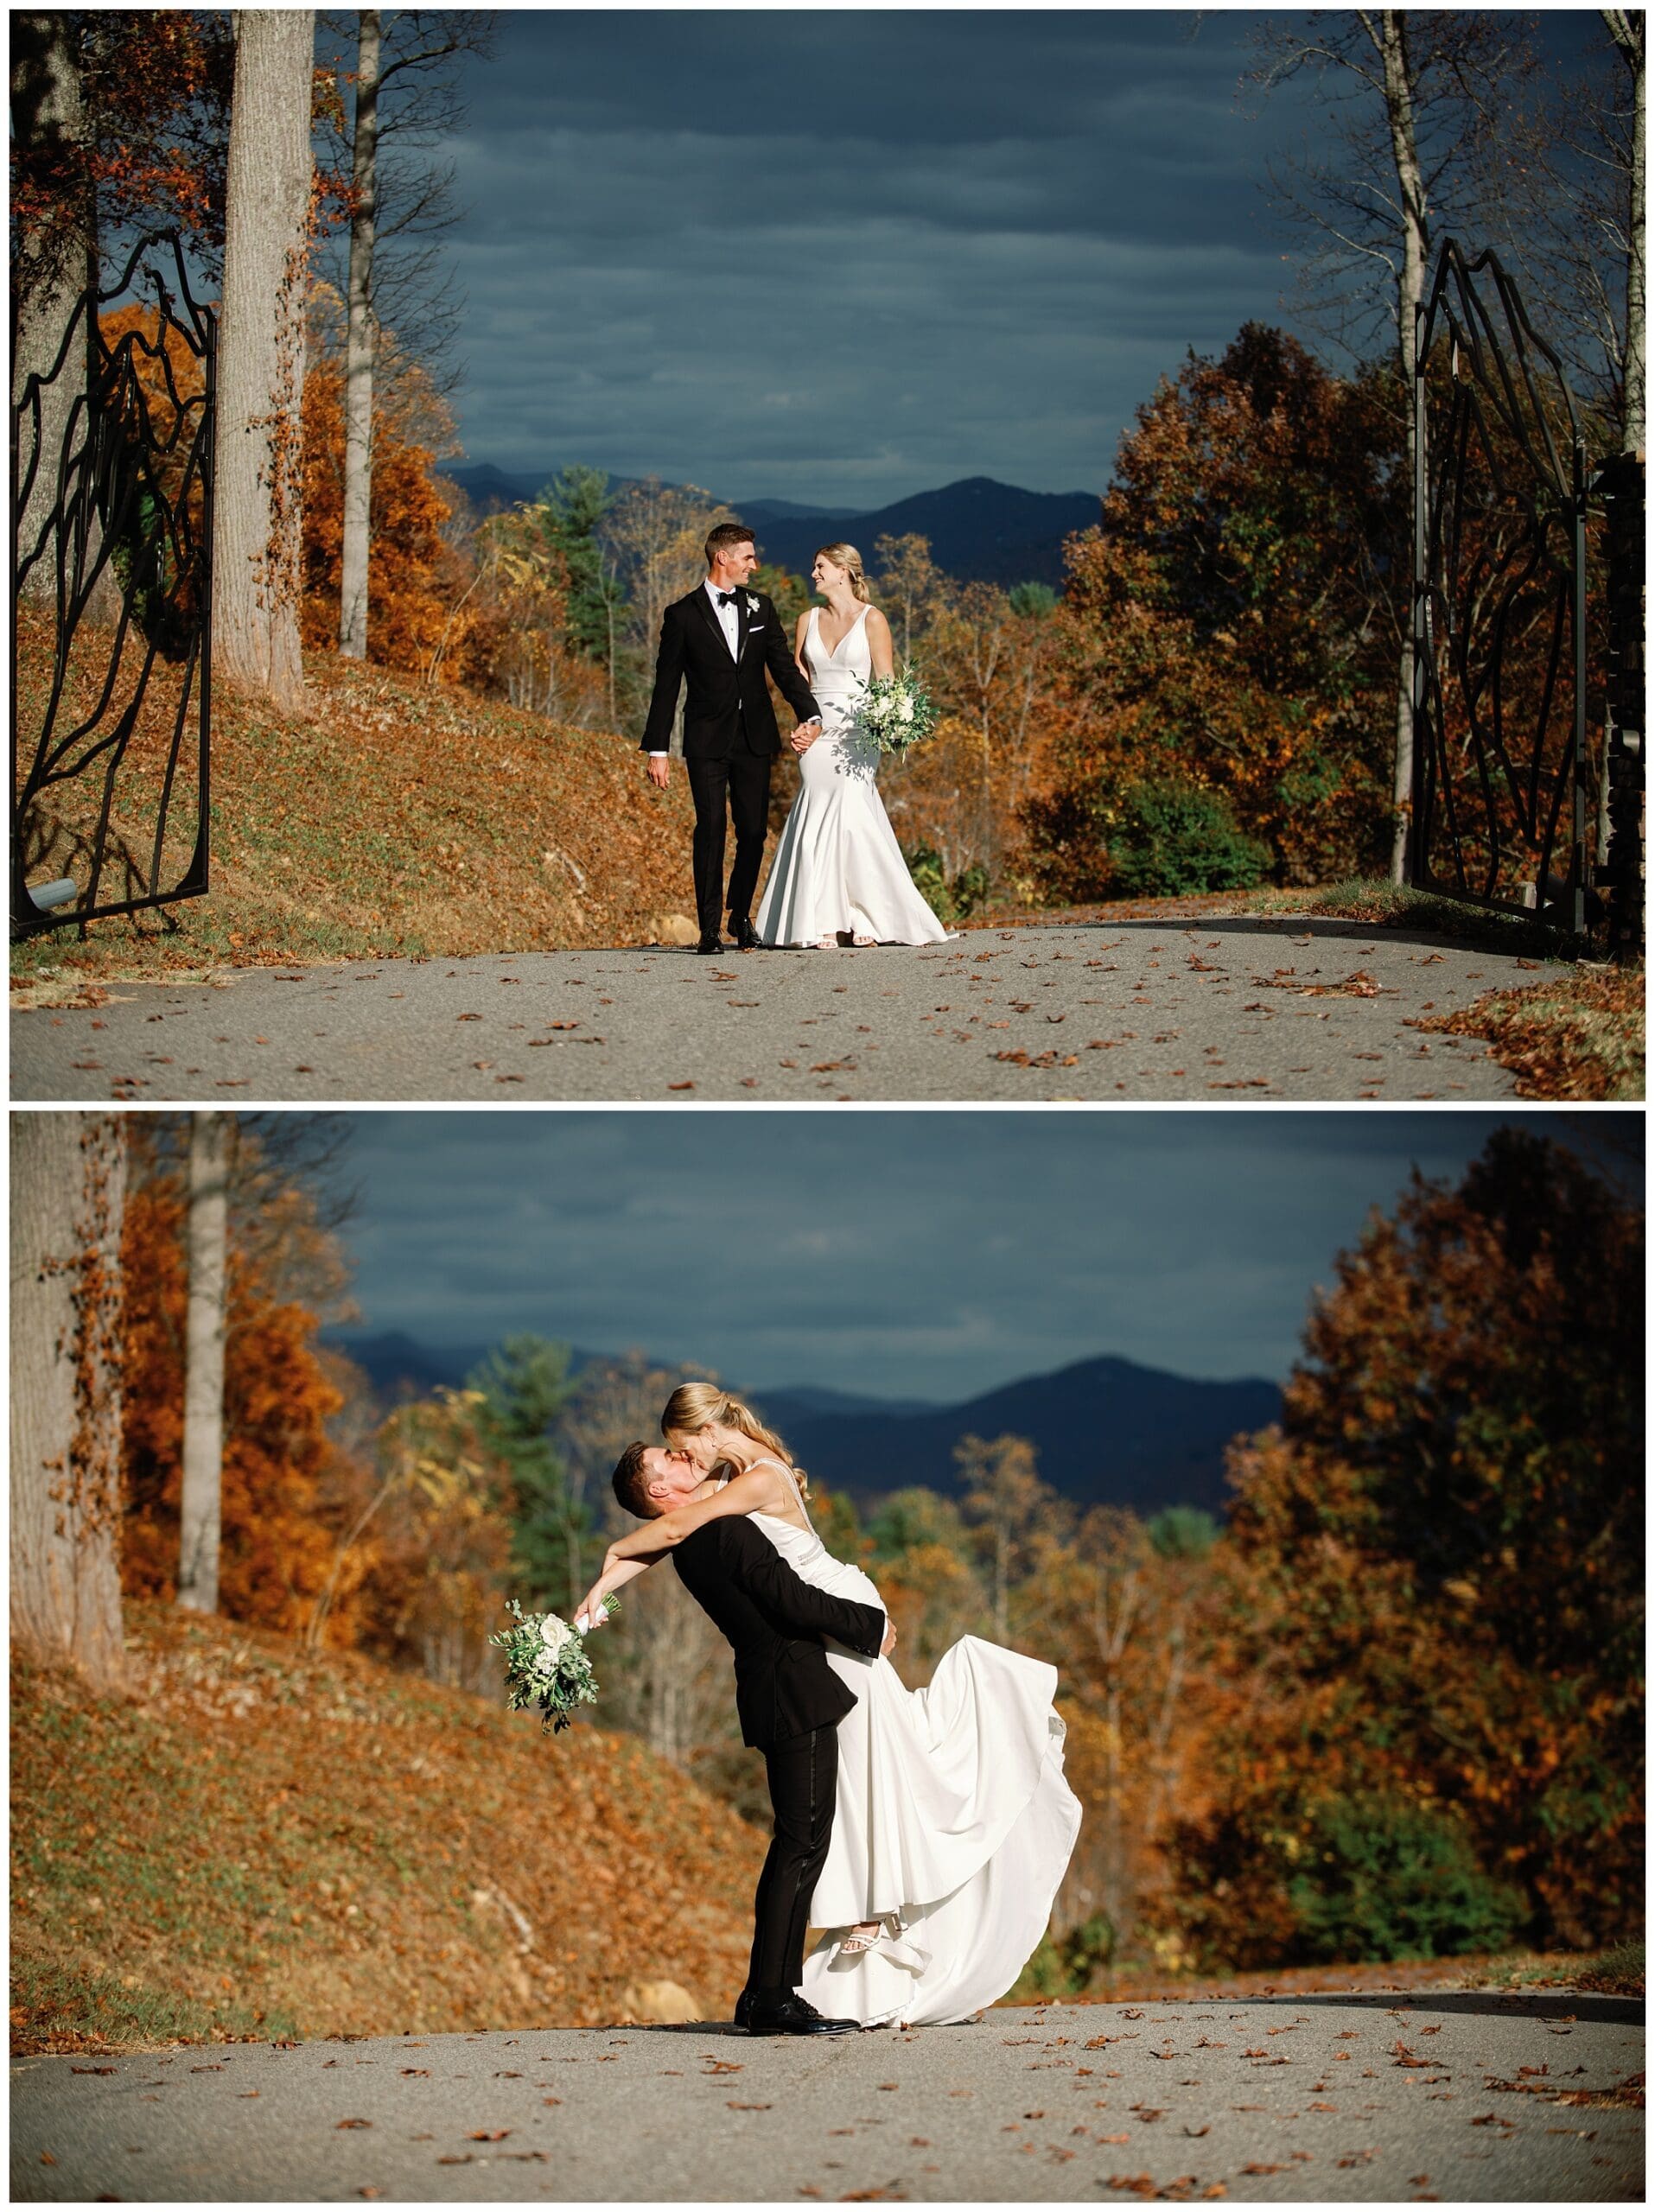 A fall wedding at Crest Center, with the bride and groom lovingly kissing on a path.